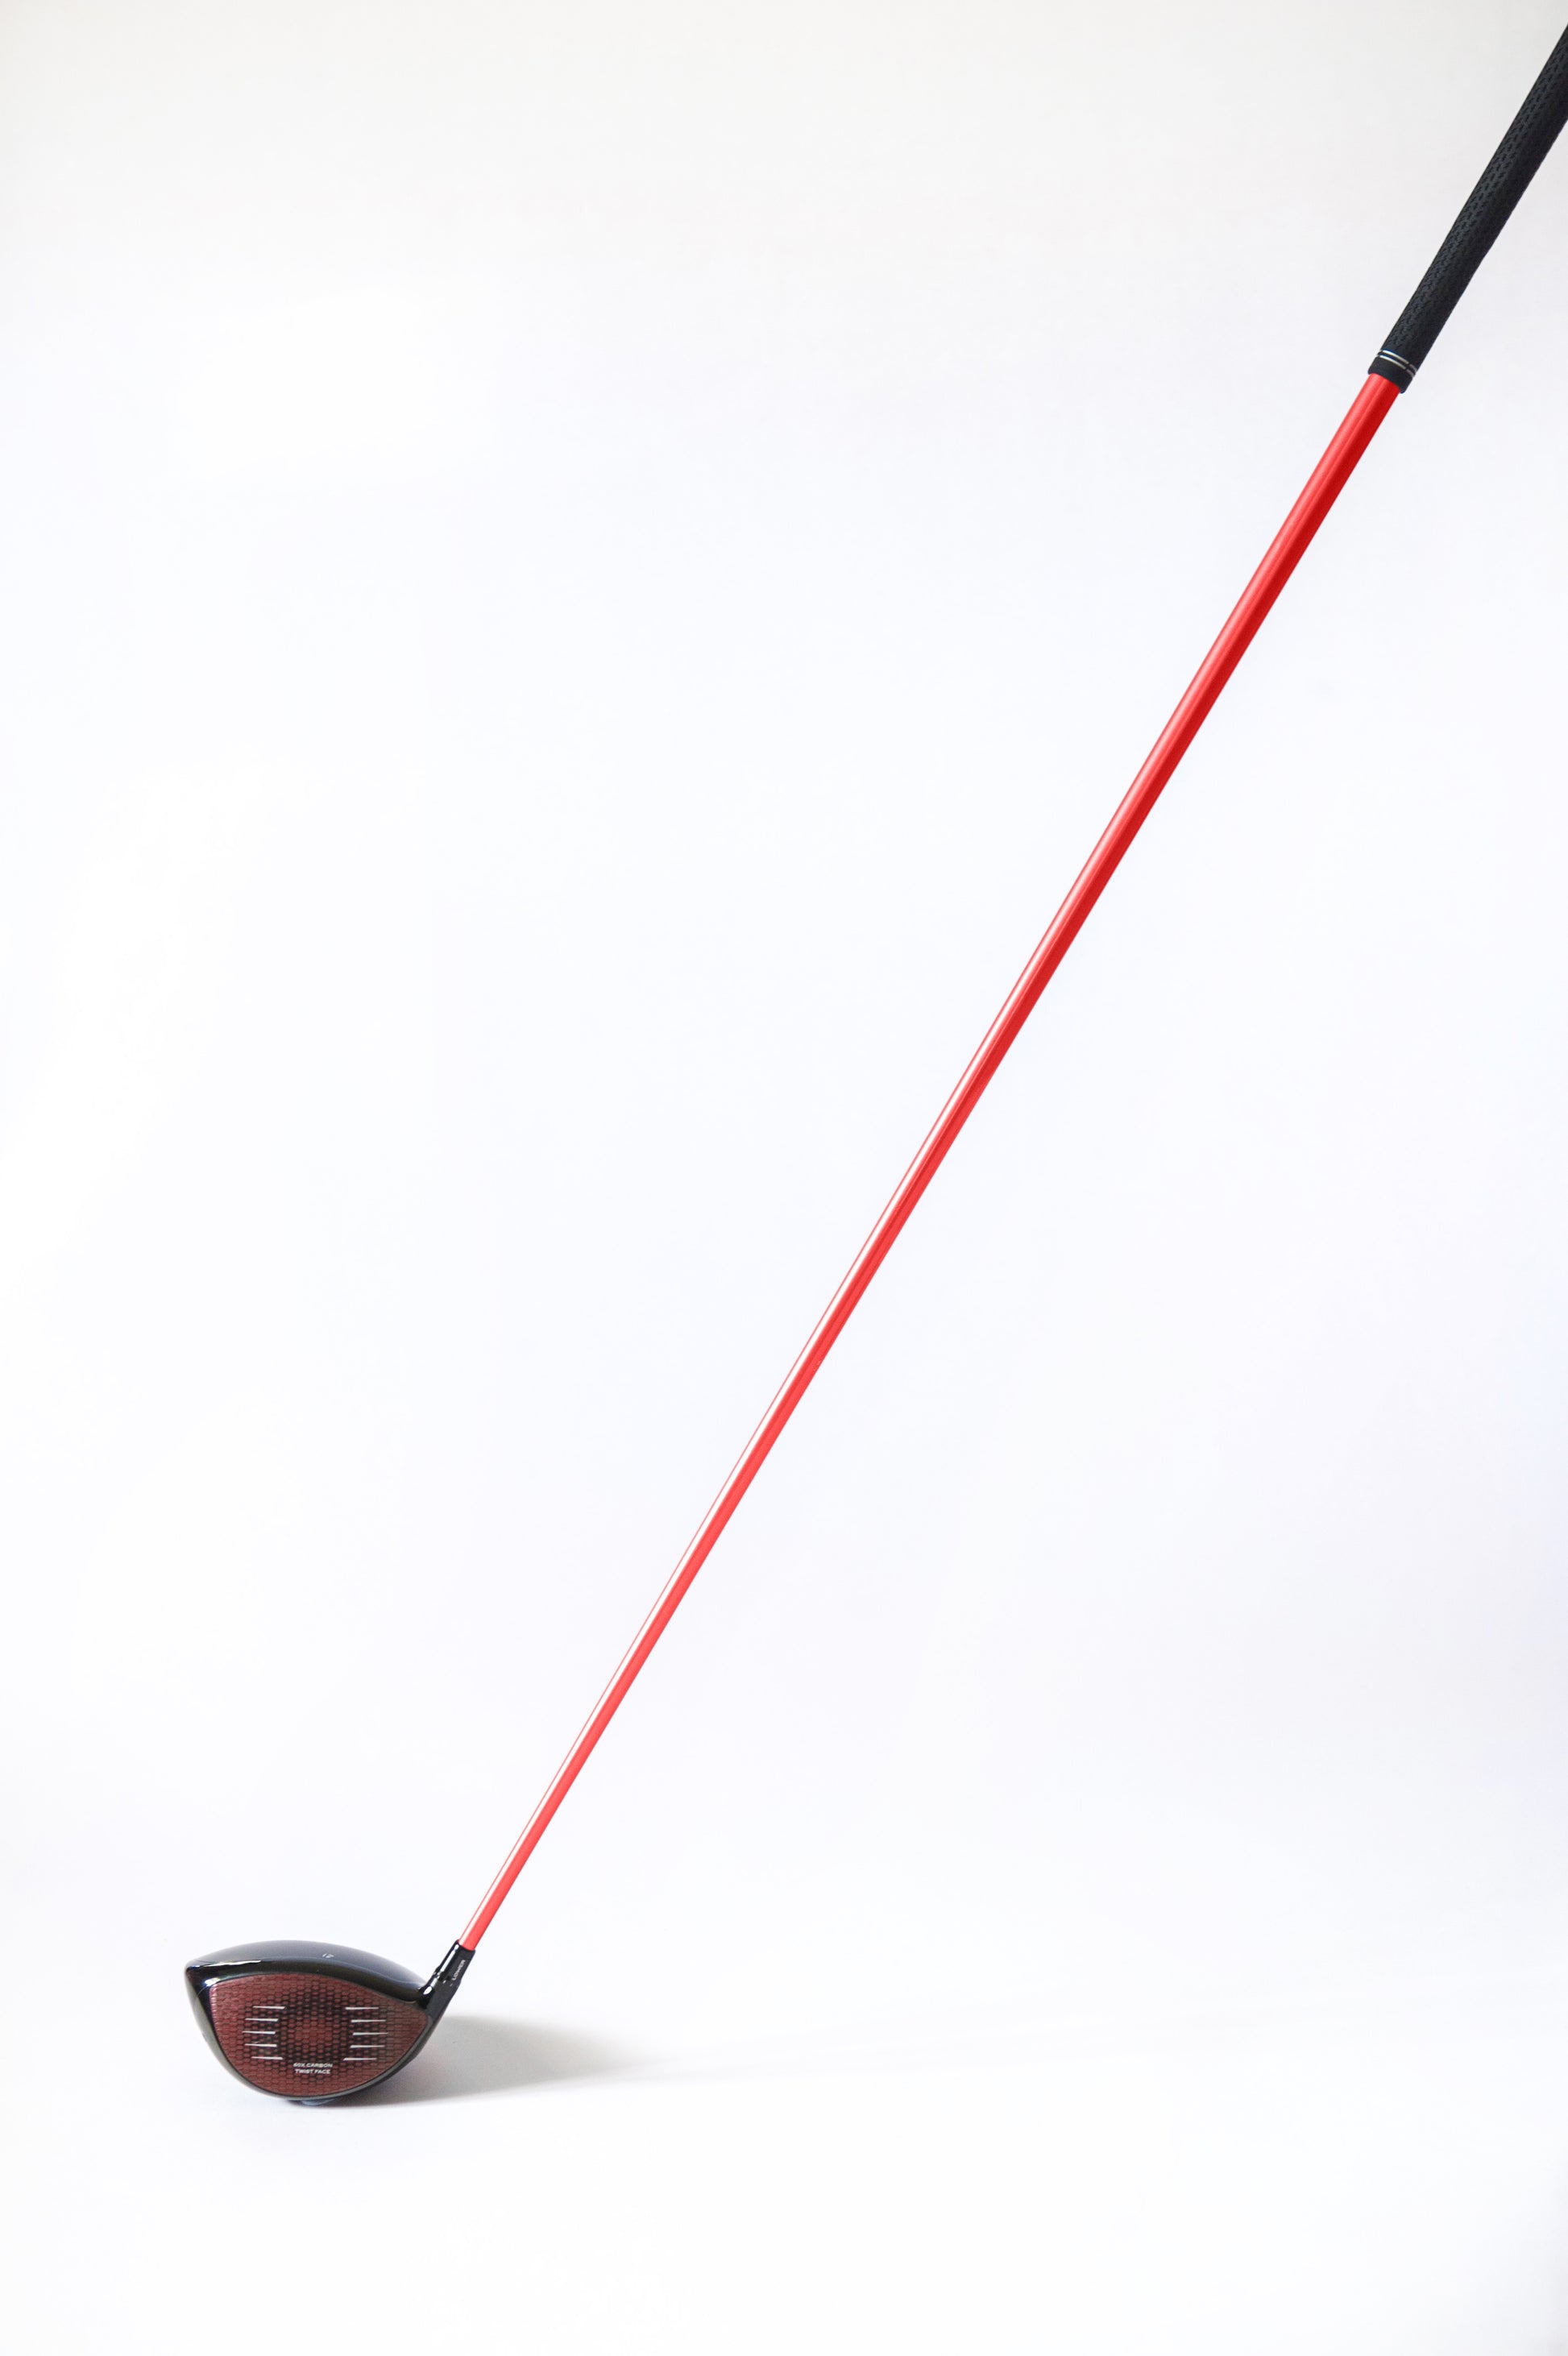 Red golf shaft wrap, face on, stealth driver